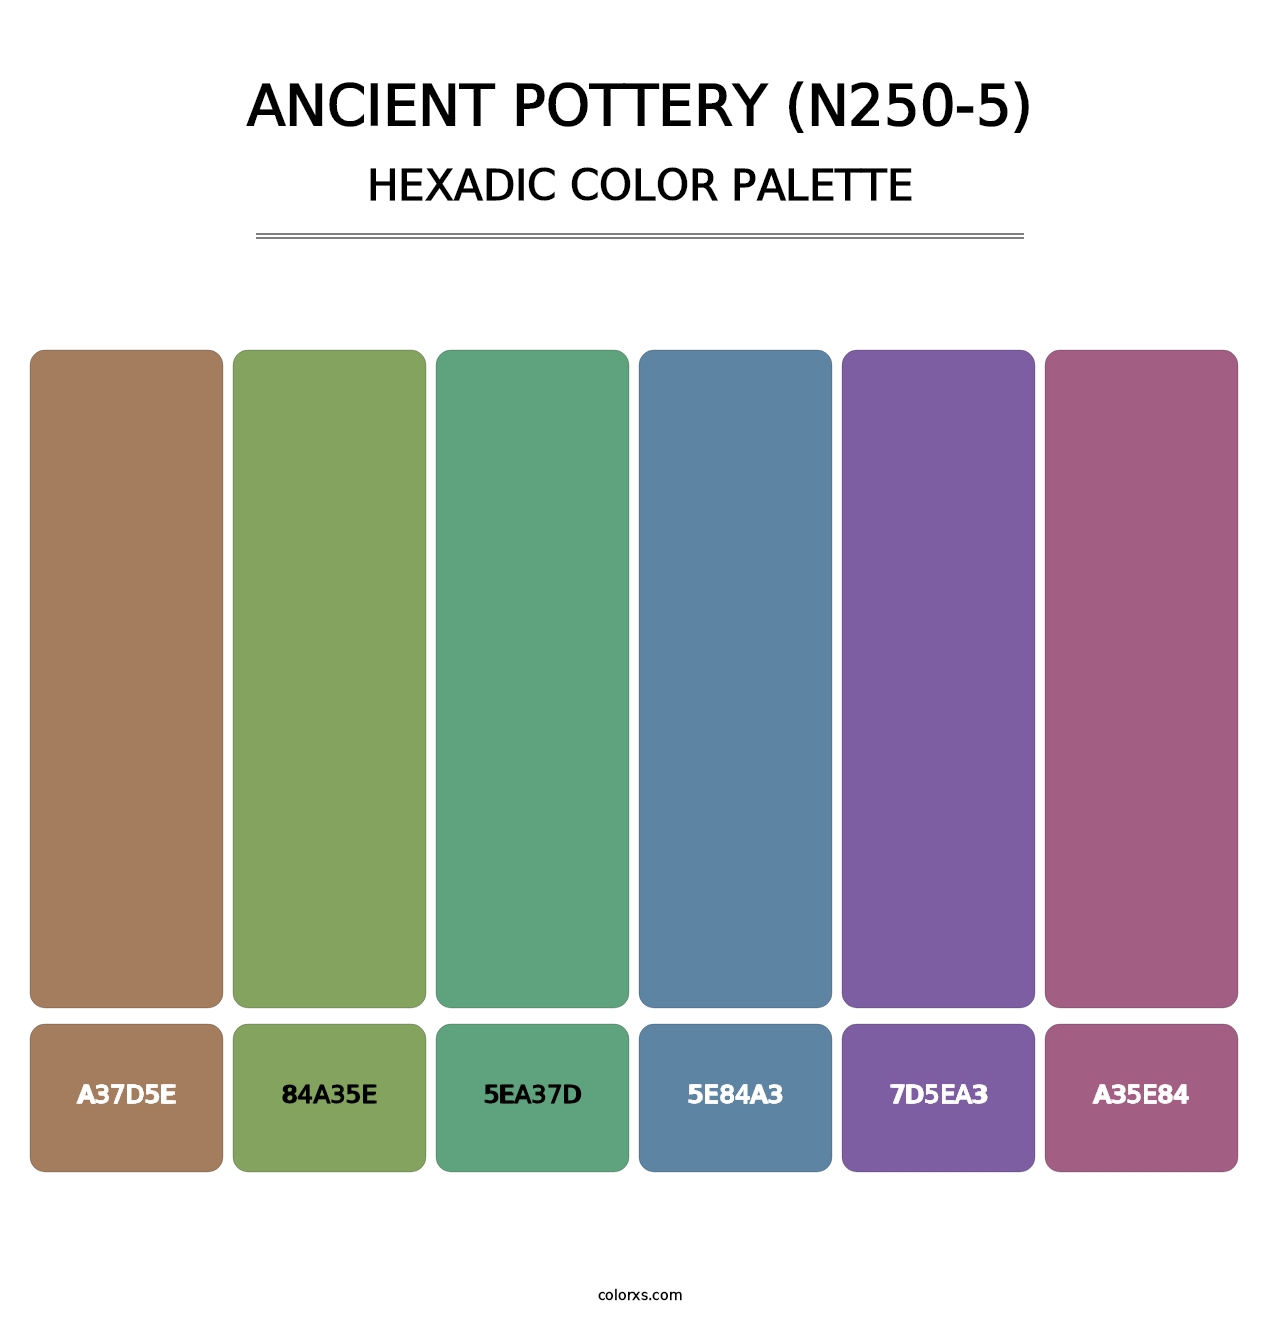 Ancient Pottery (N250-5) - Hexadic Color Palette